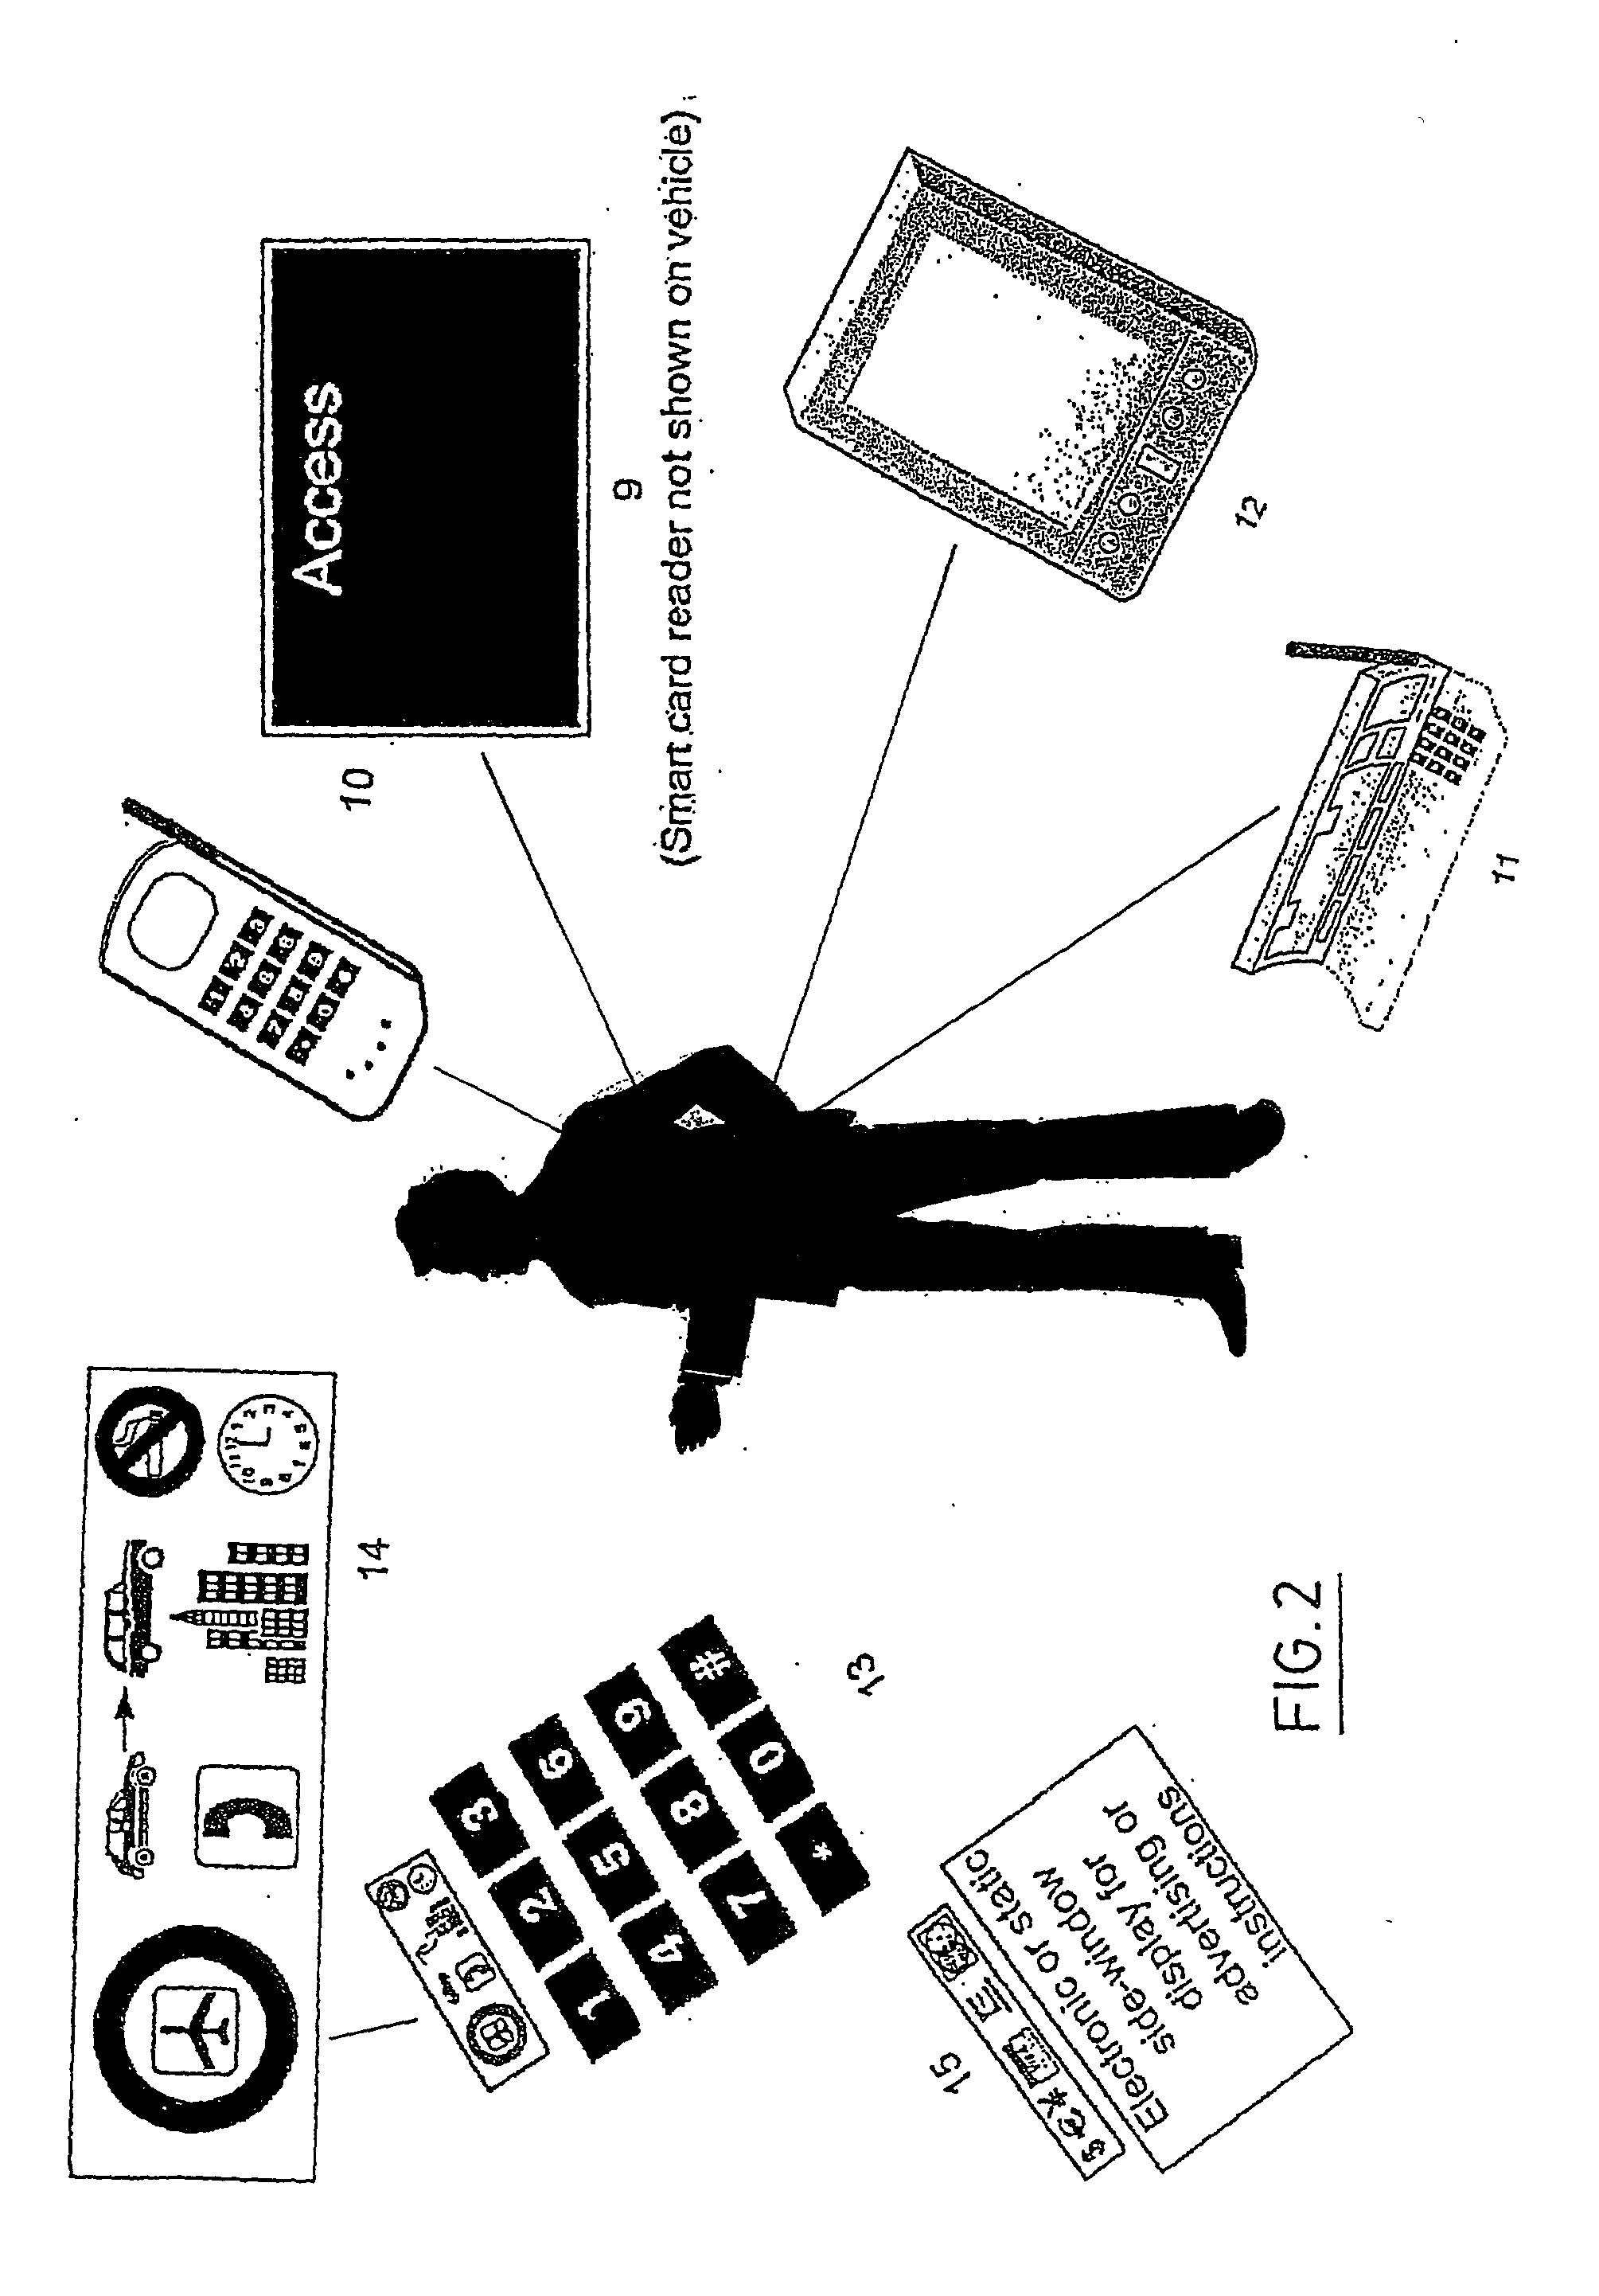 System and method for automating a vehicle rental process